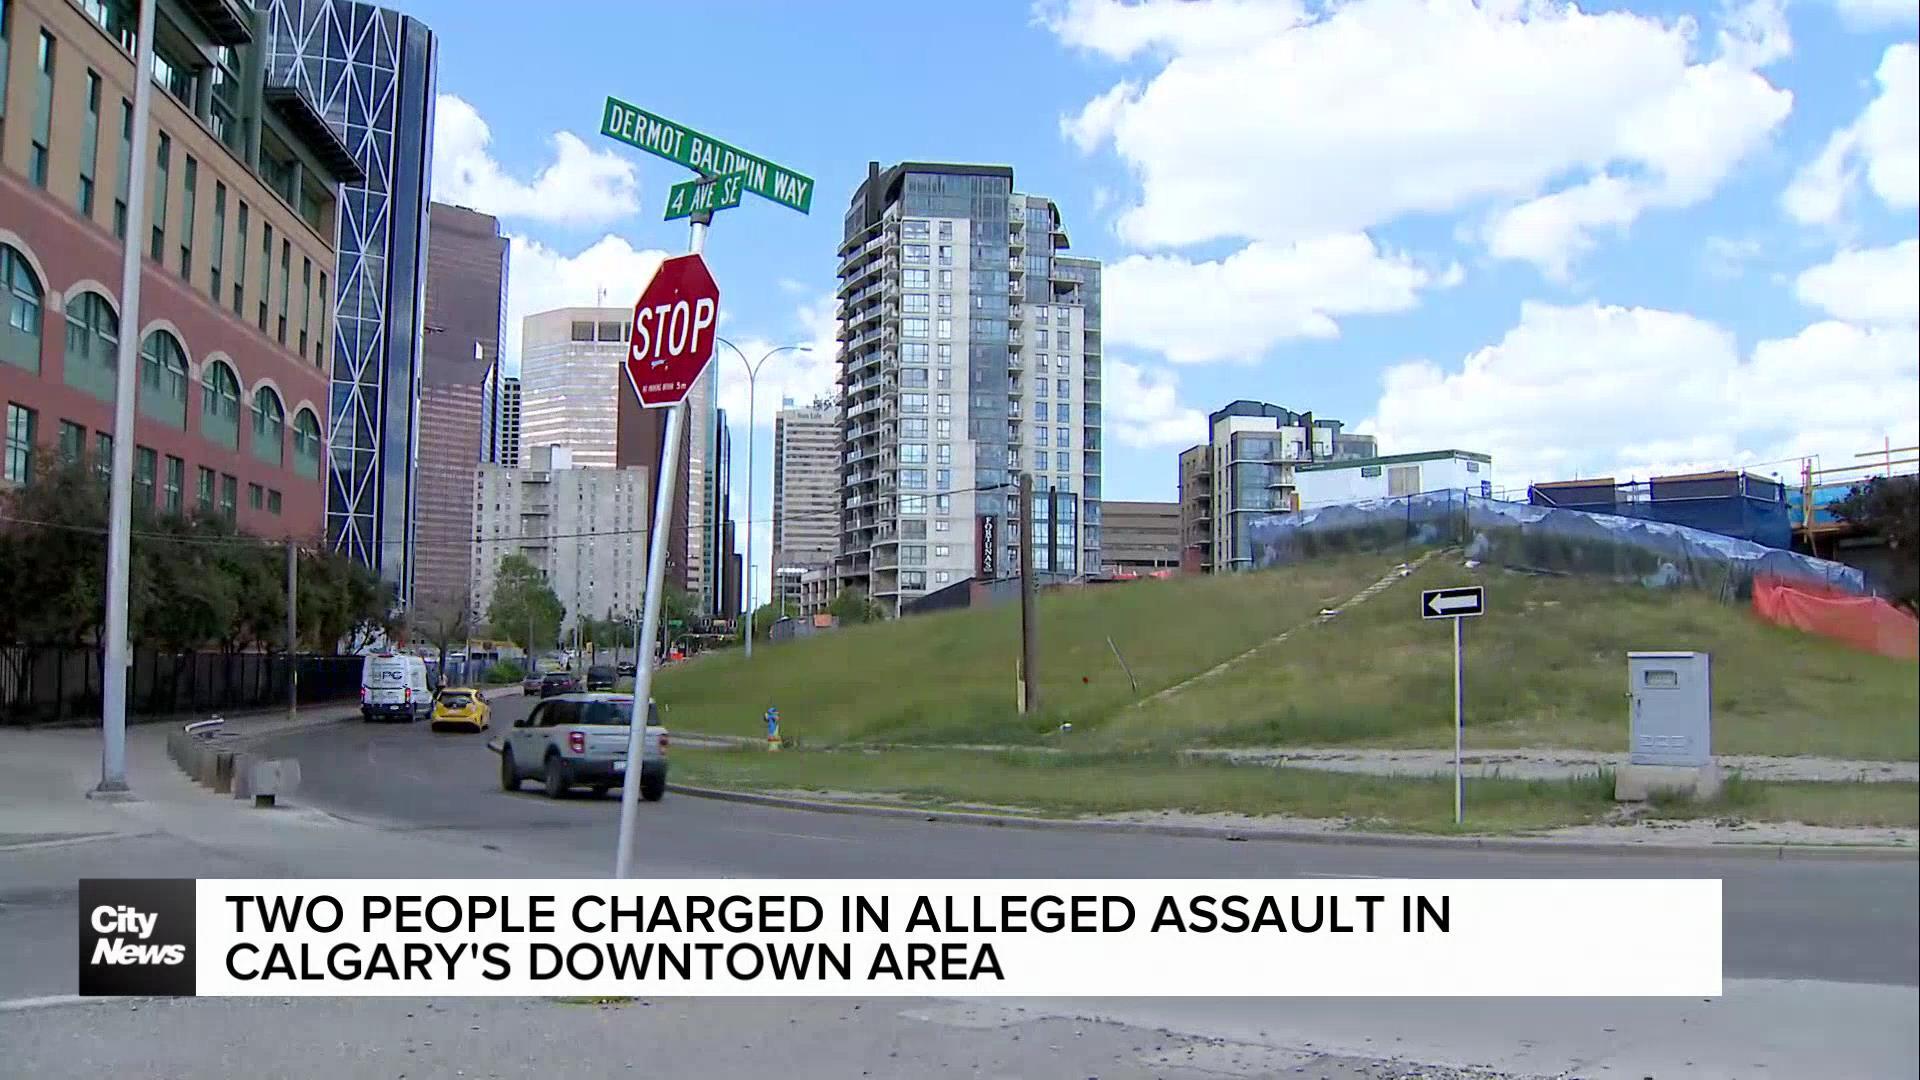 Police charge two in alleged downtown Calgary assault